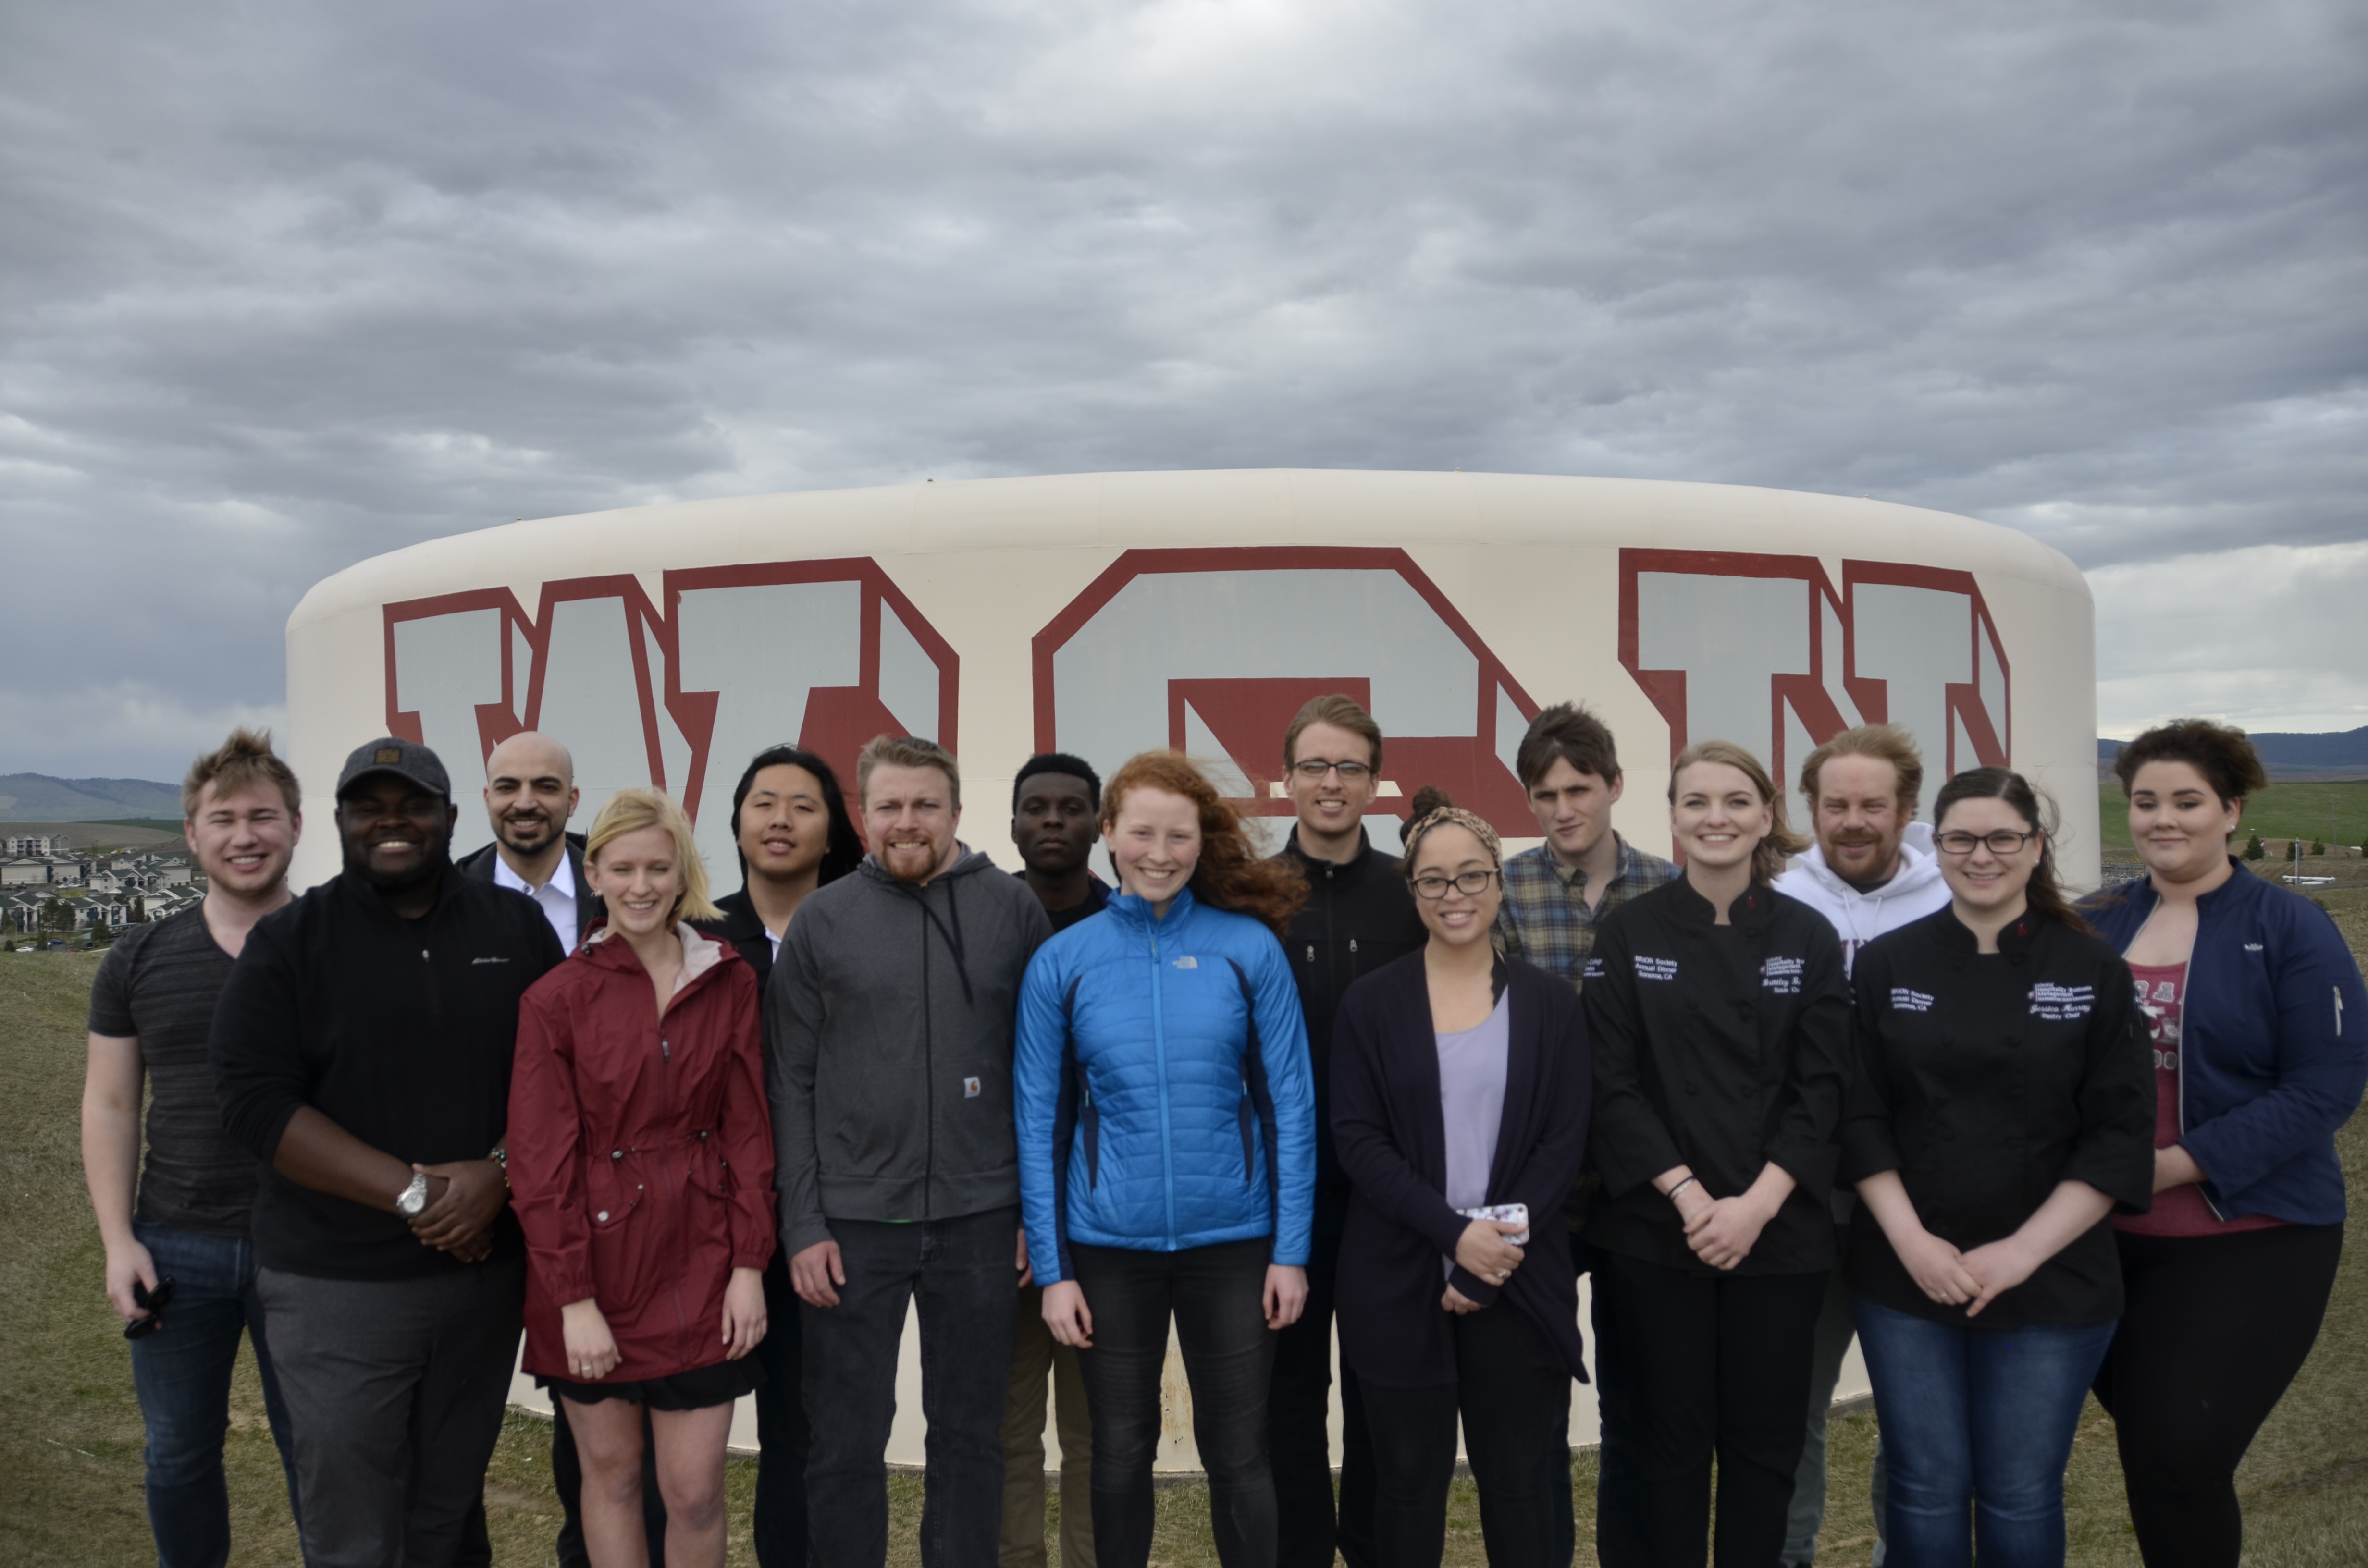 Group photo of the Washington State team members for Solar Decathlon 2017.